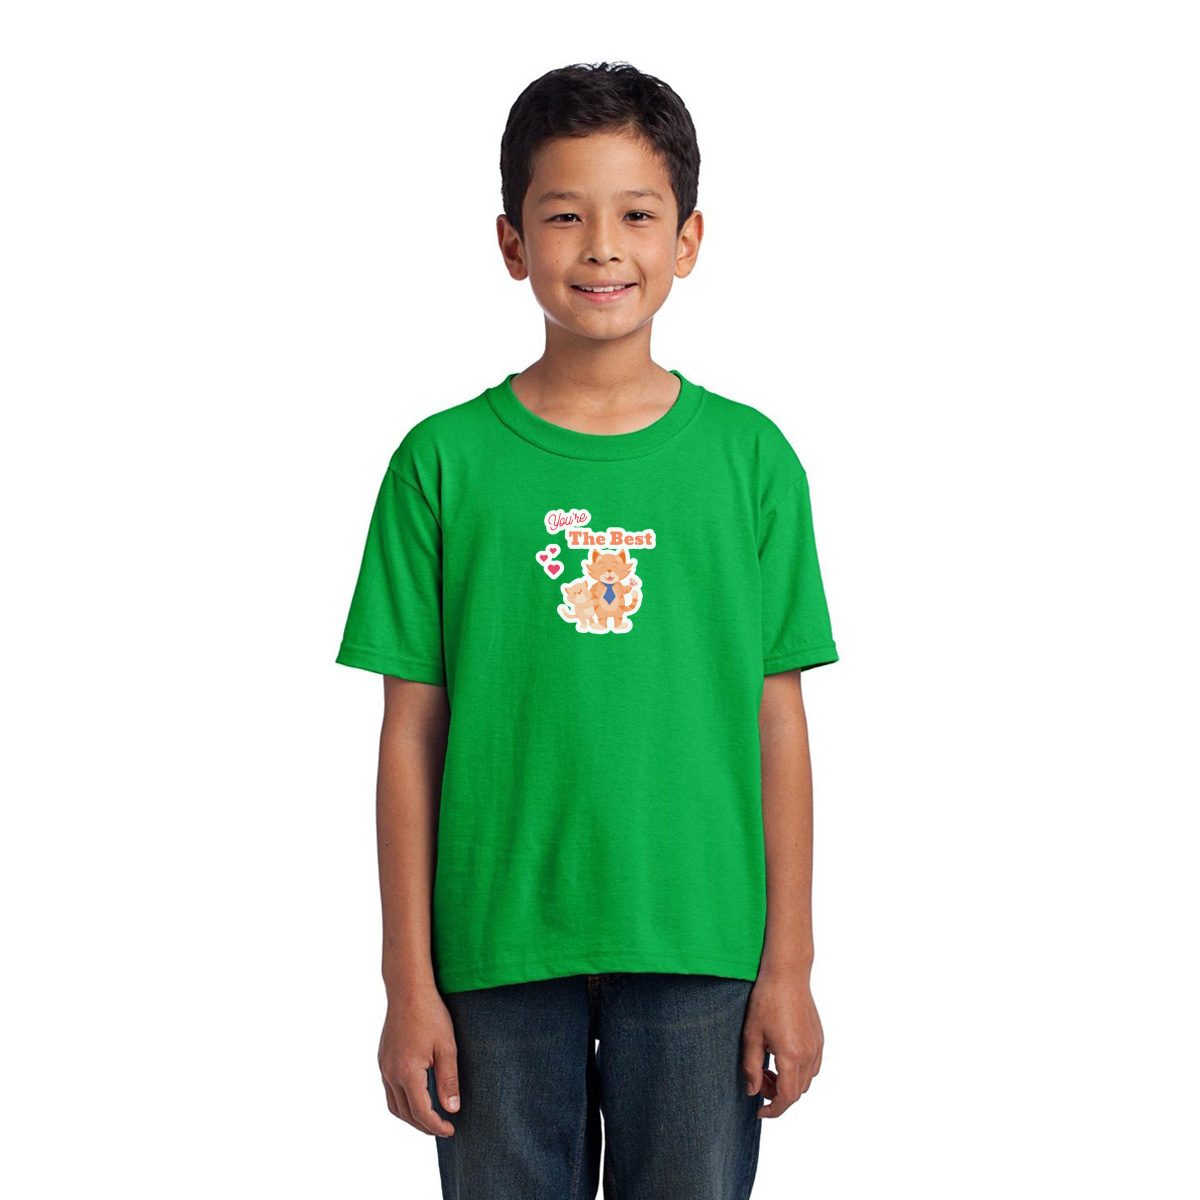 You are the Best Toddler T-shirt | Green